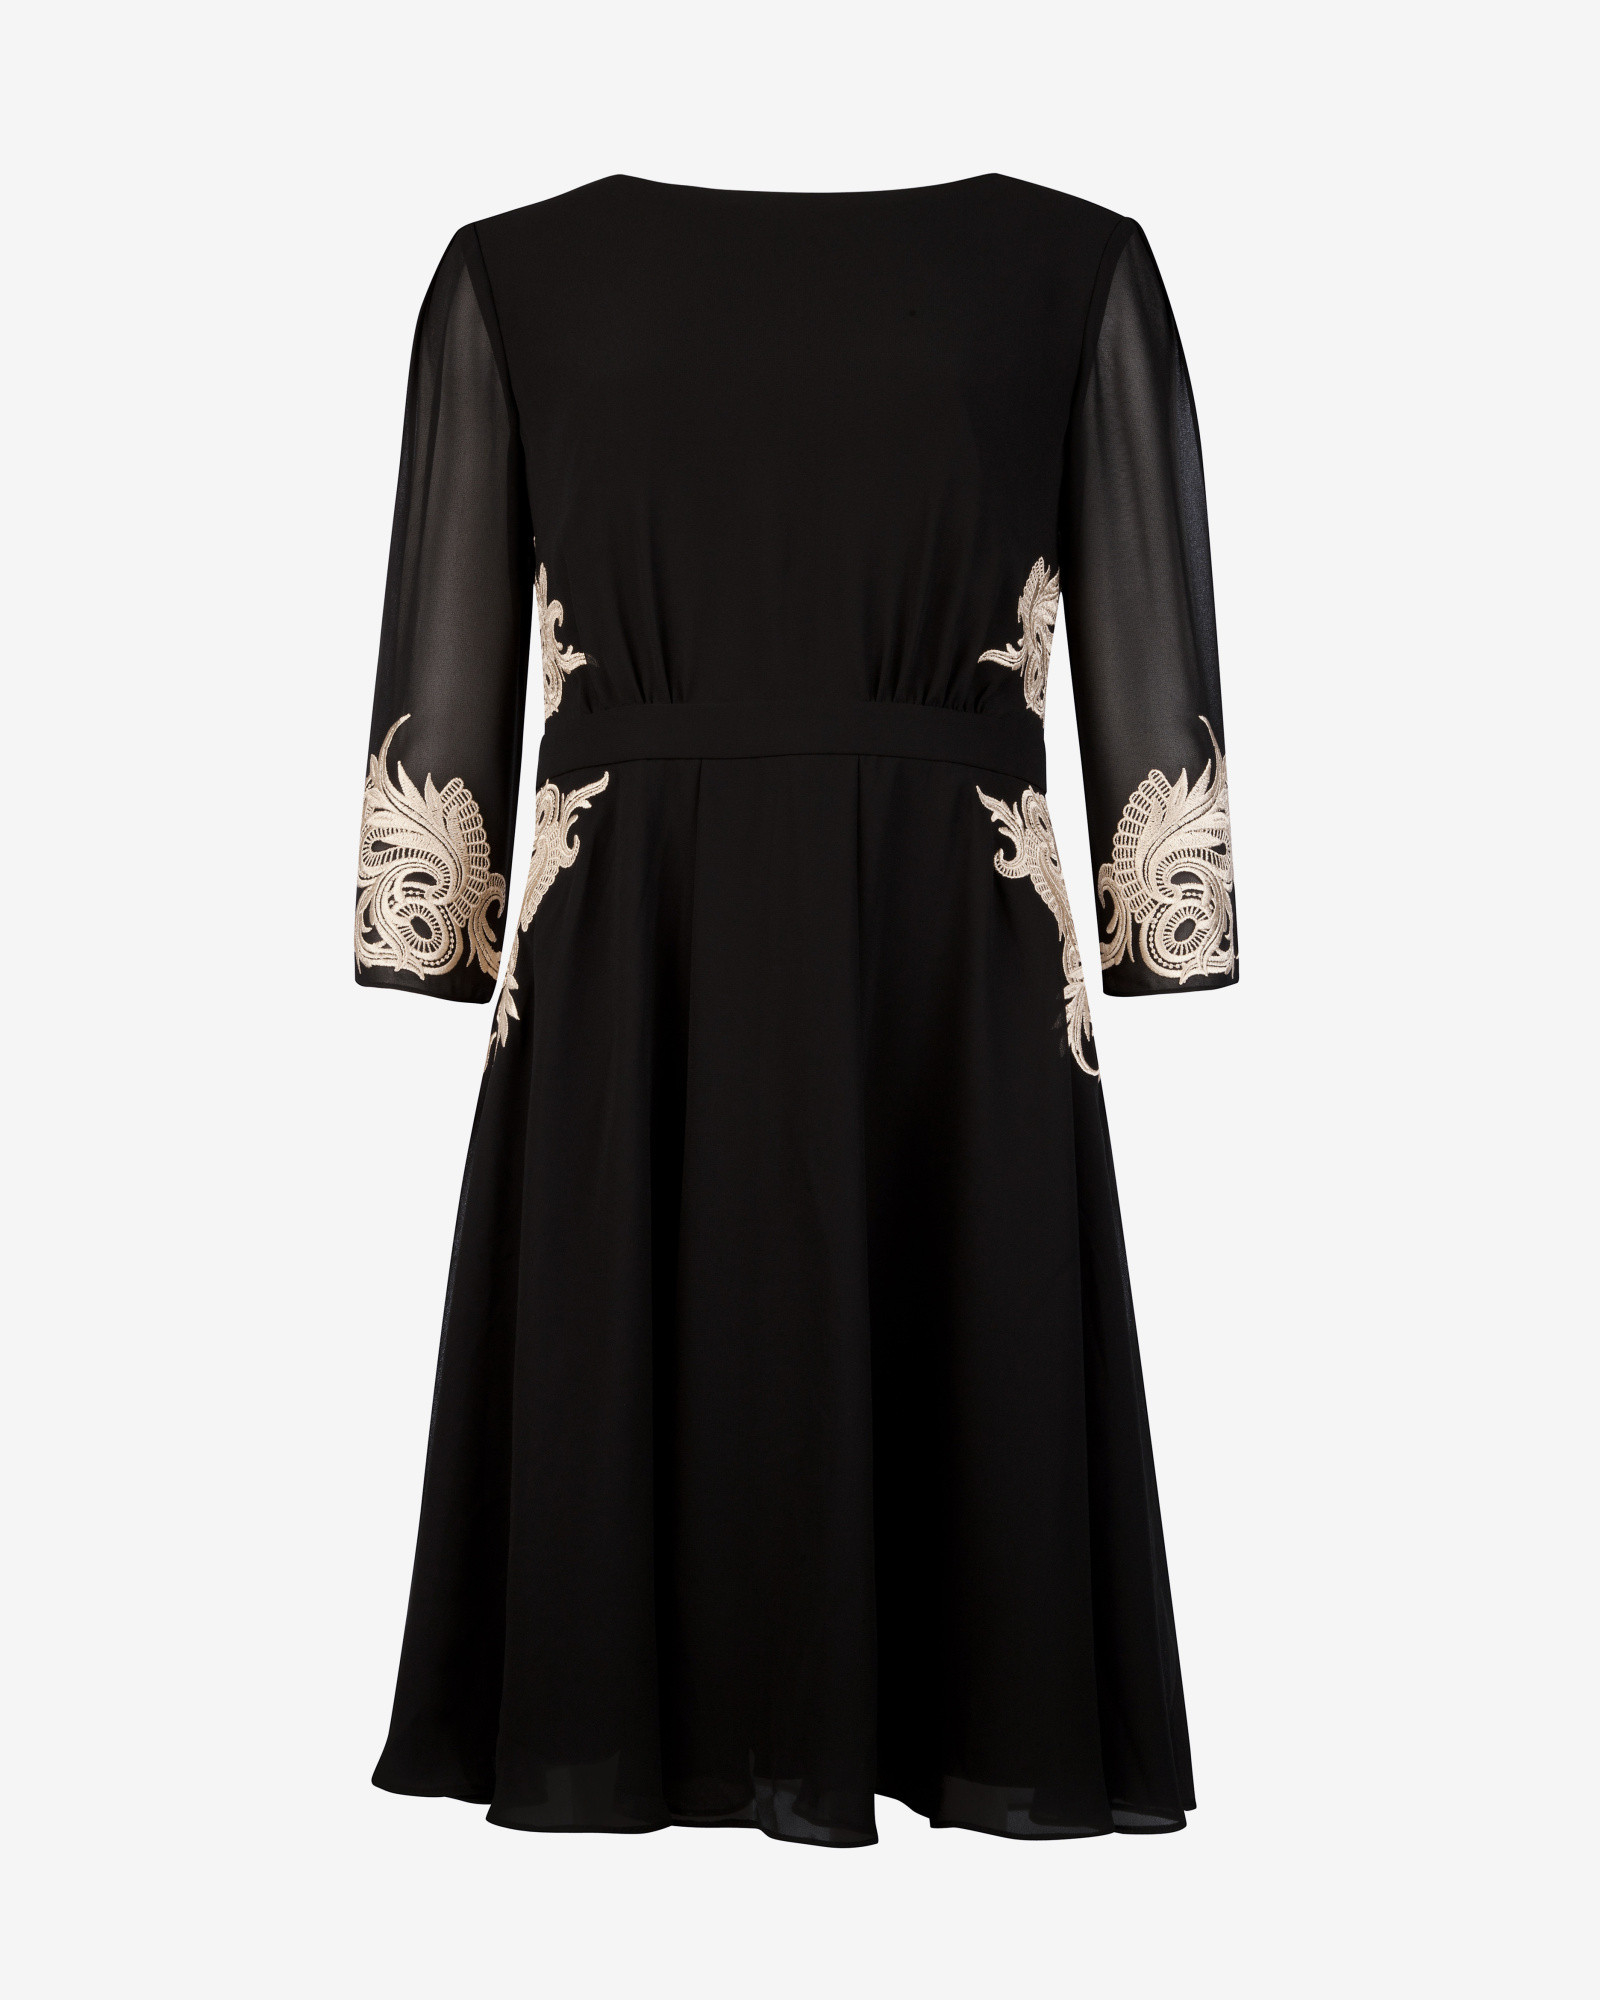 Ted Baker Embroidered Dress in Black - Lyst